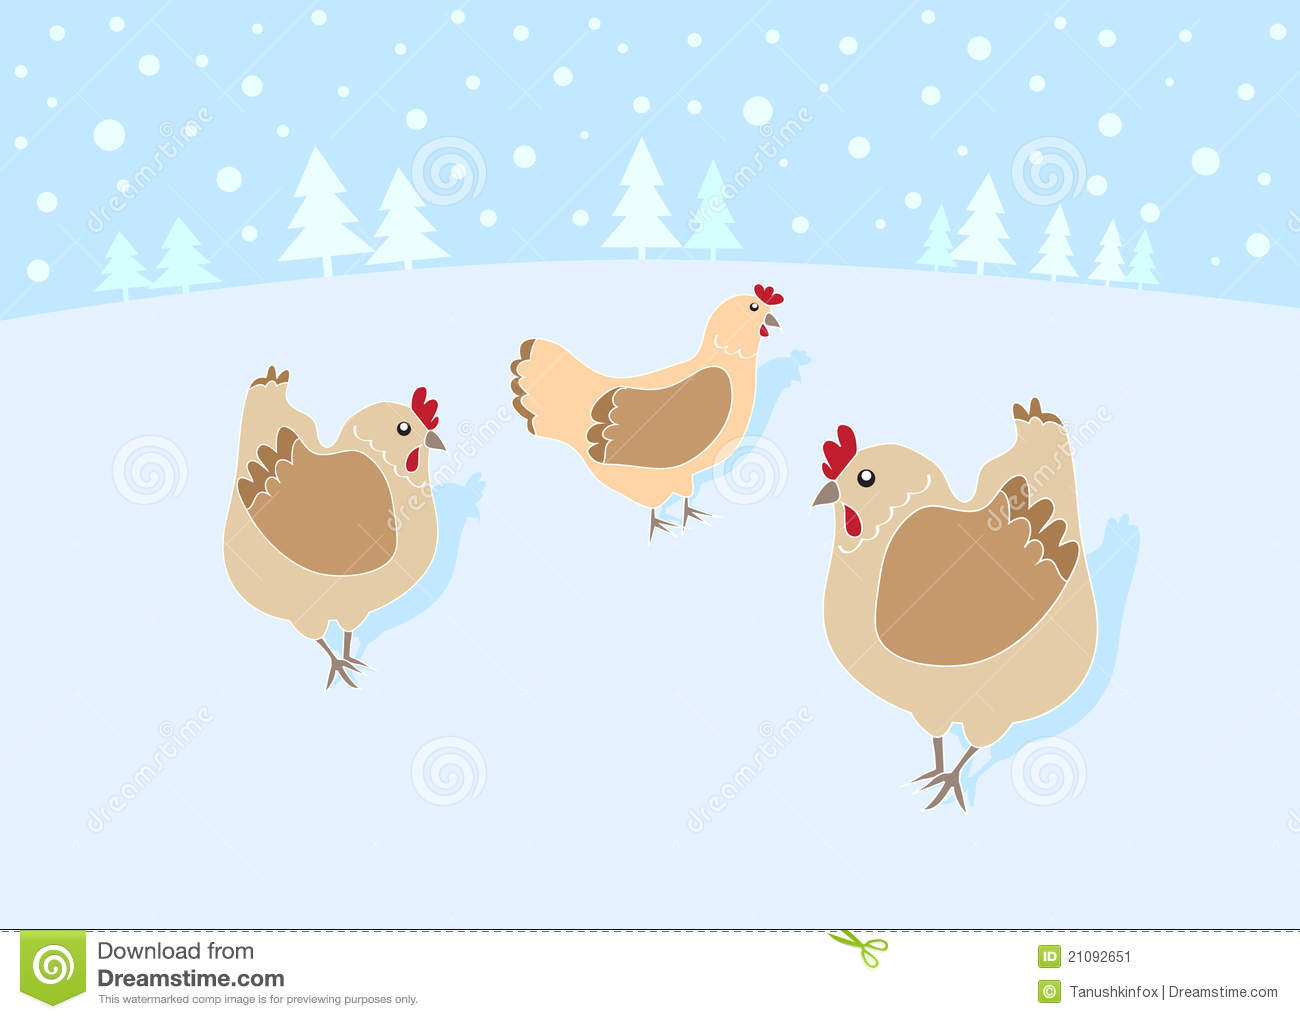 French Hens Clipart Displaying 17 Images For 3 French Hens Clipart